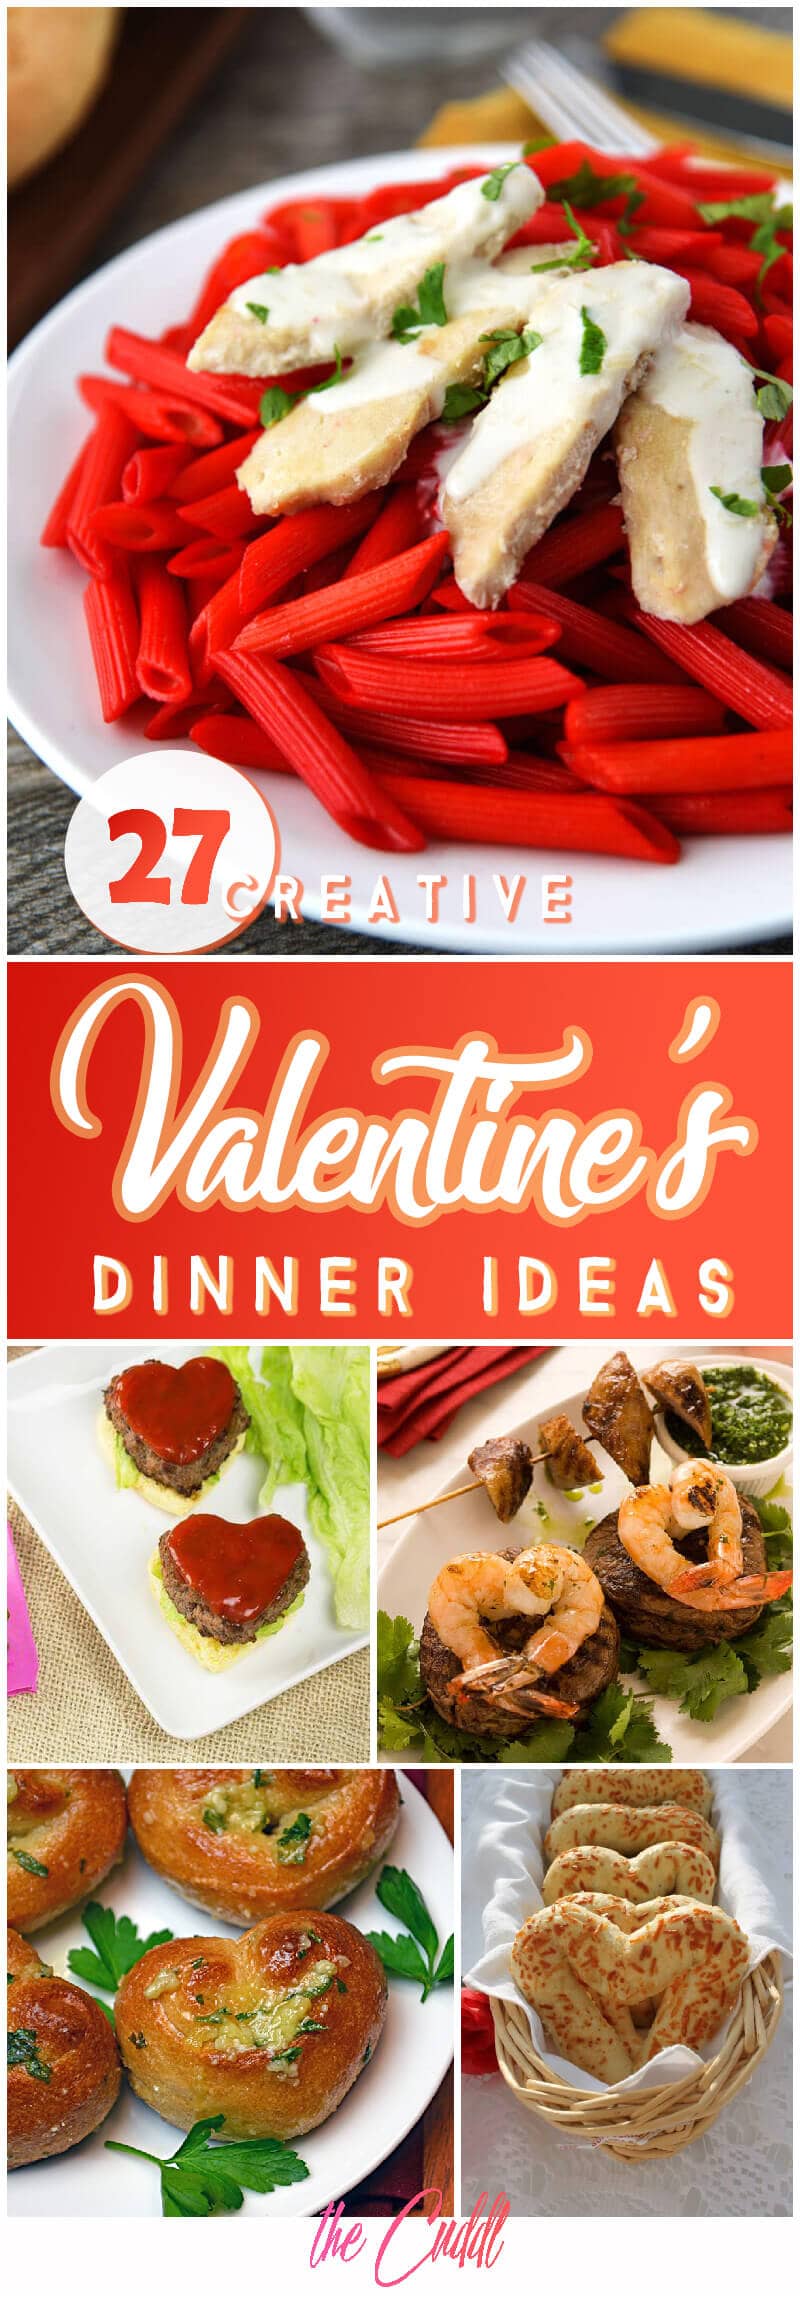 27 Creative Valentine's Day Dinner Ideas to Show Your Love